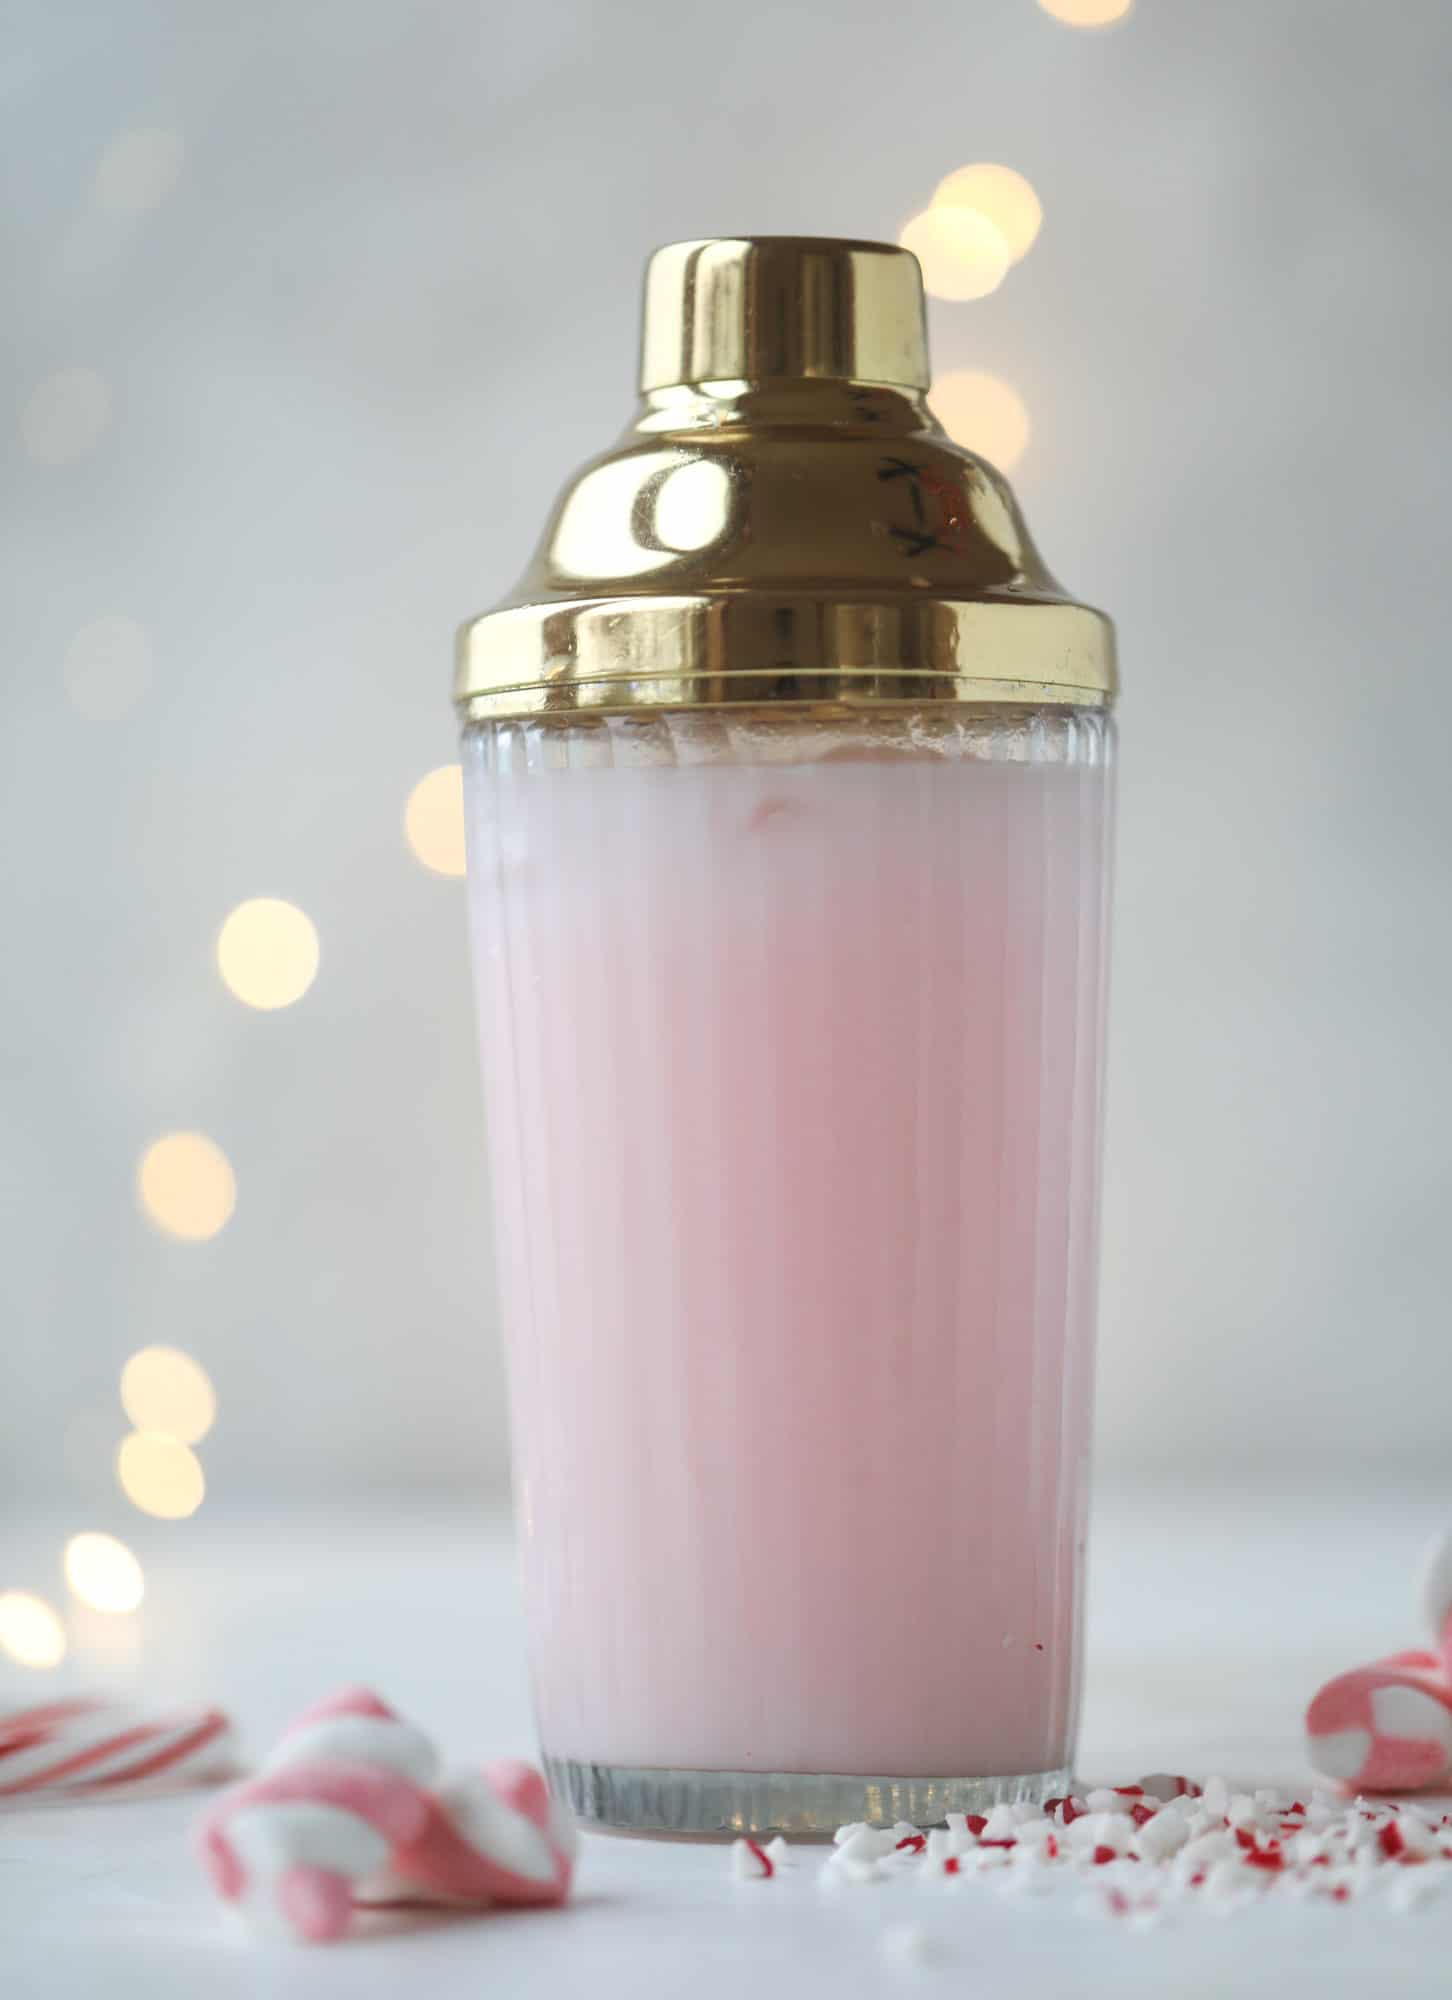 This pink peppermint cocktail is full of holiday cheer! Candy cane vodka, creme de cacao, vanilla and a drop of cream come together to create the perfect iced holiday drink that tastes like a treat! I howsweeteats.com #pinkpeppermint #cocktail